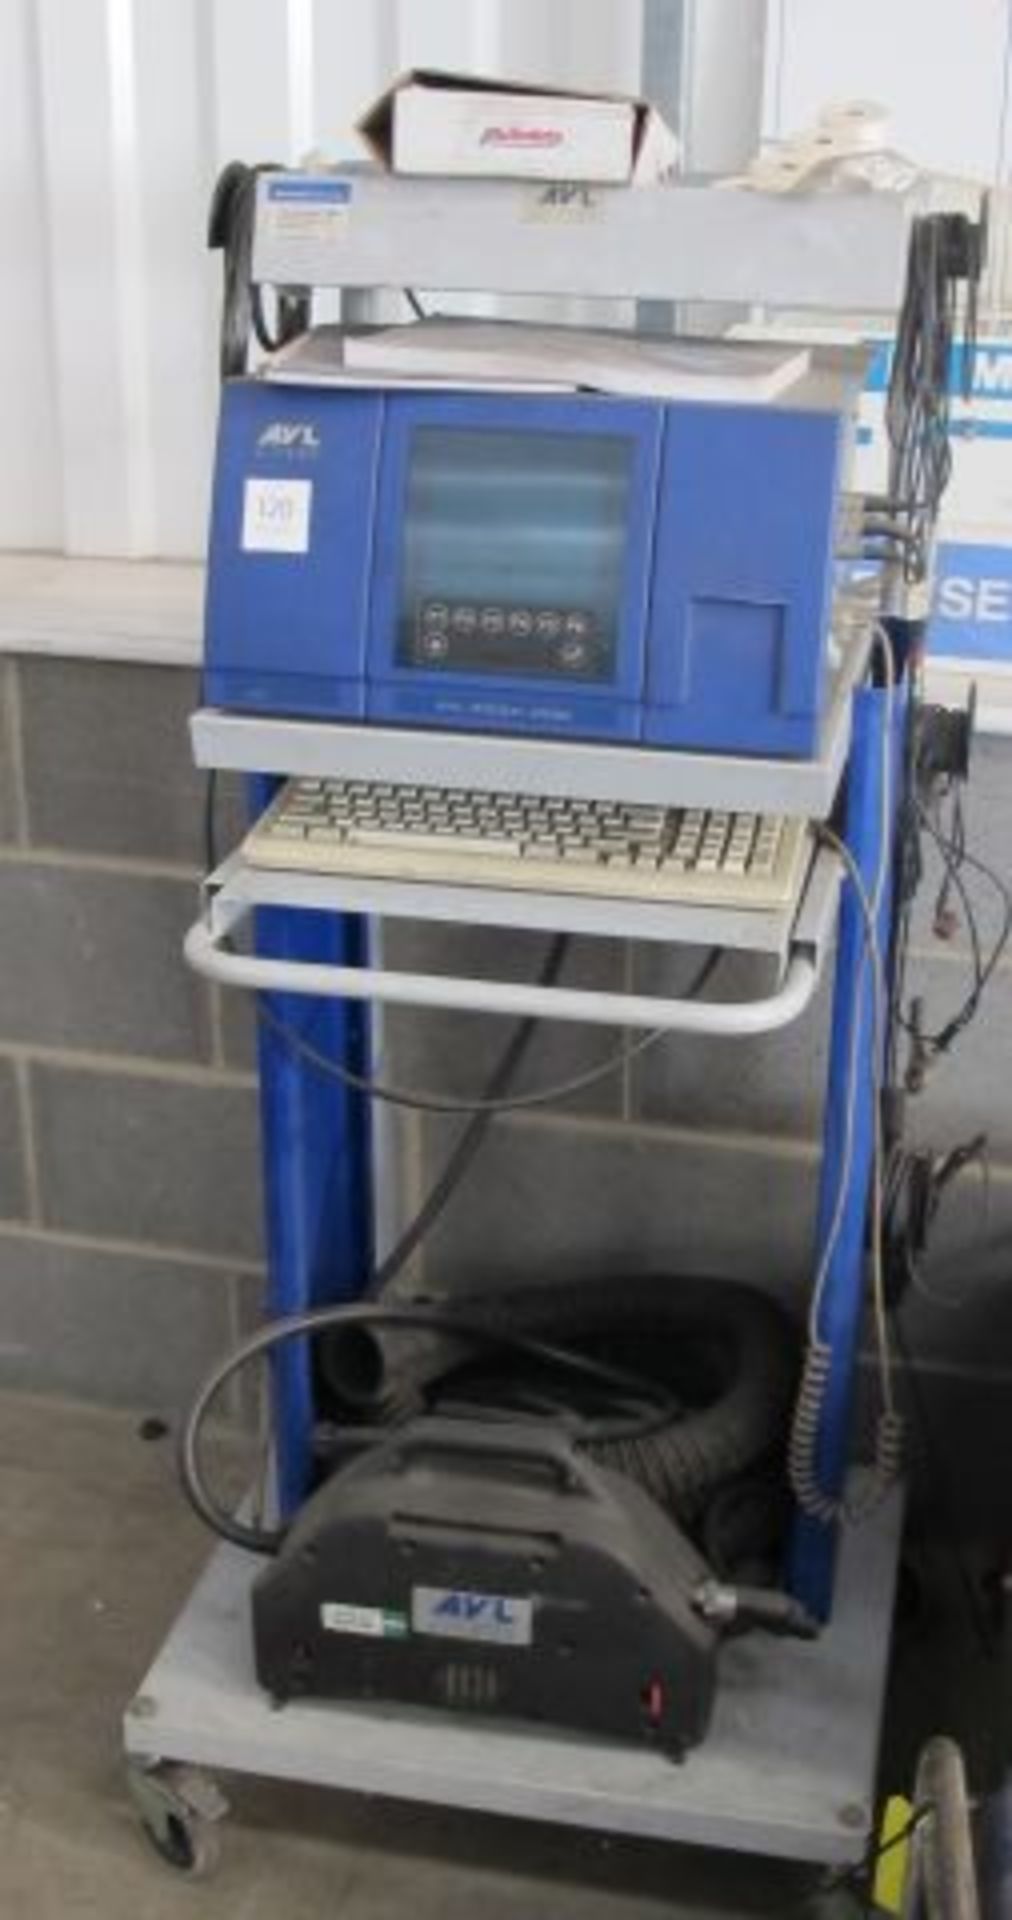 An AVL Ditest, AVL Dicom 4000 Emission Tester. Please note there is a £5 plus VAT Lift Out Fee on